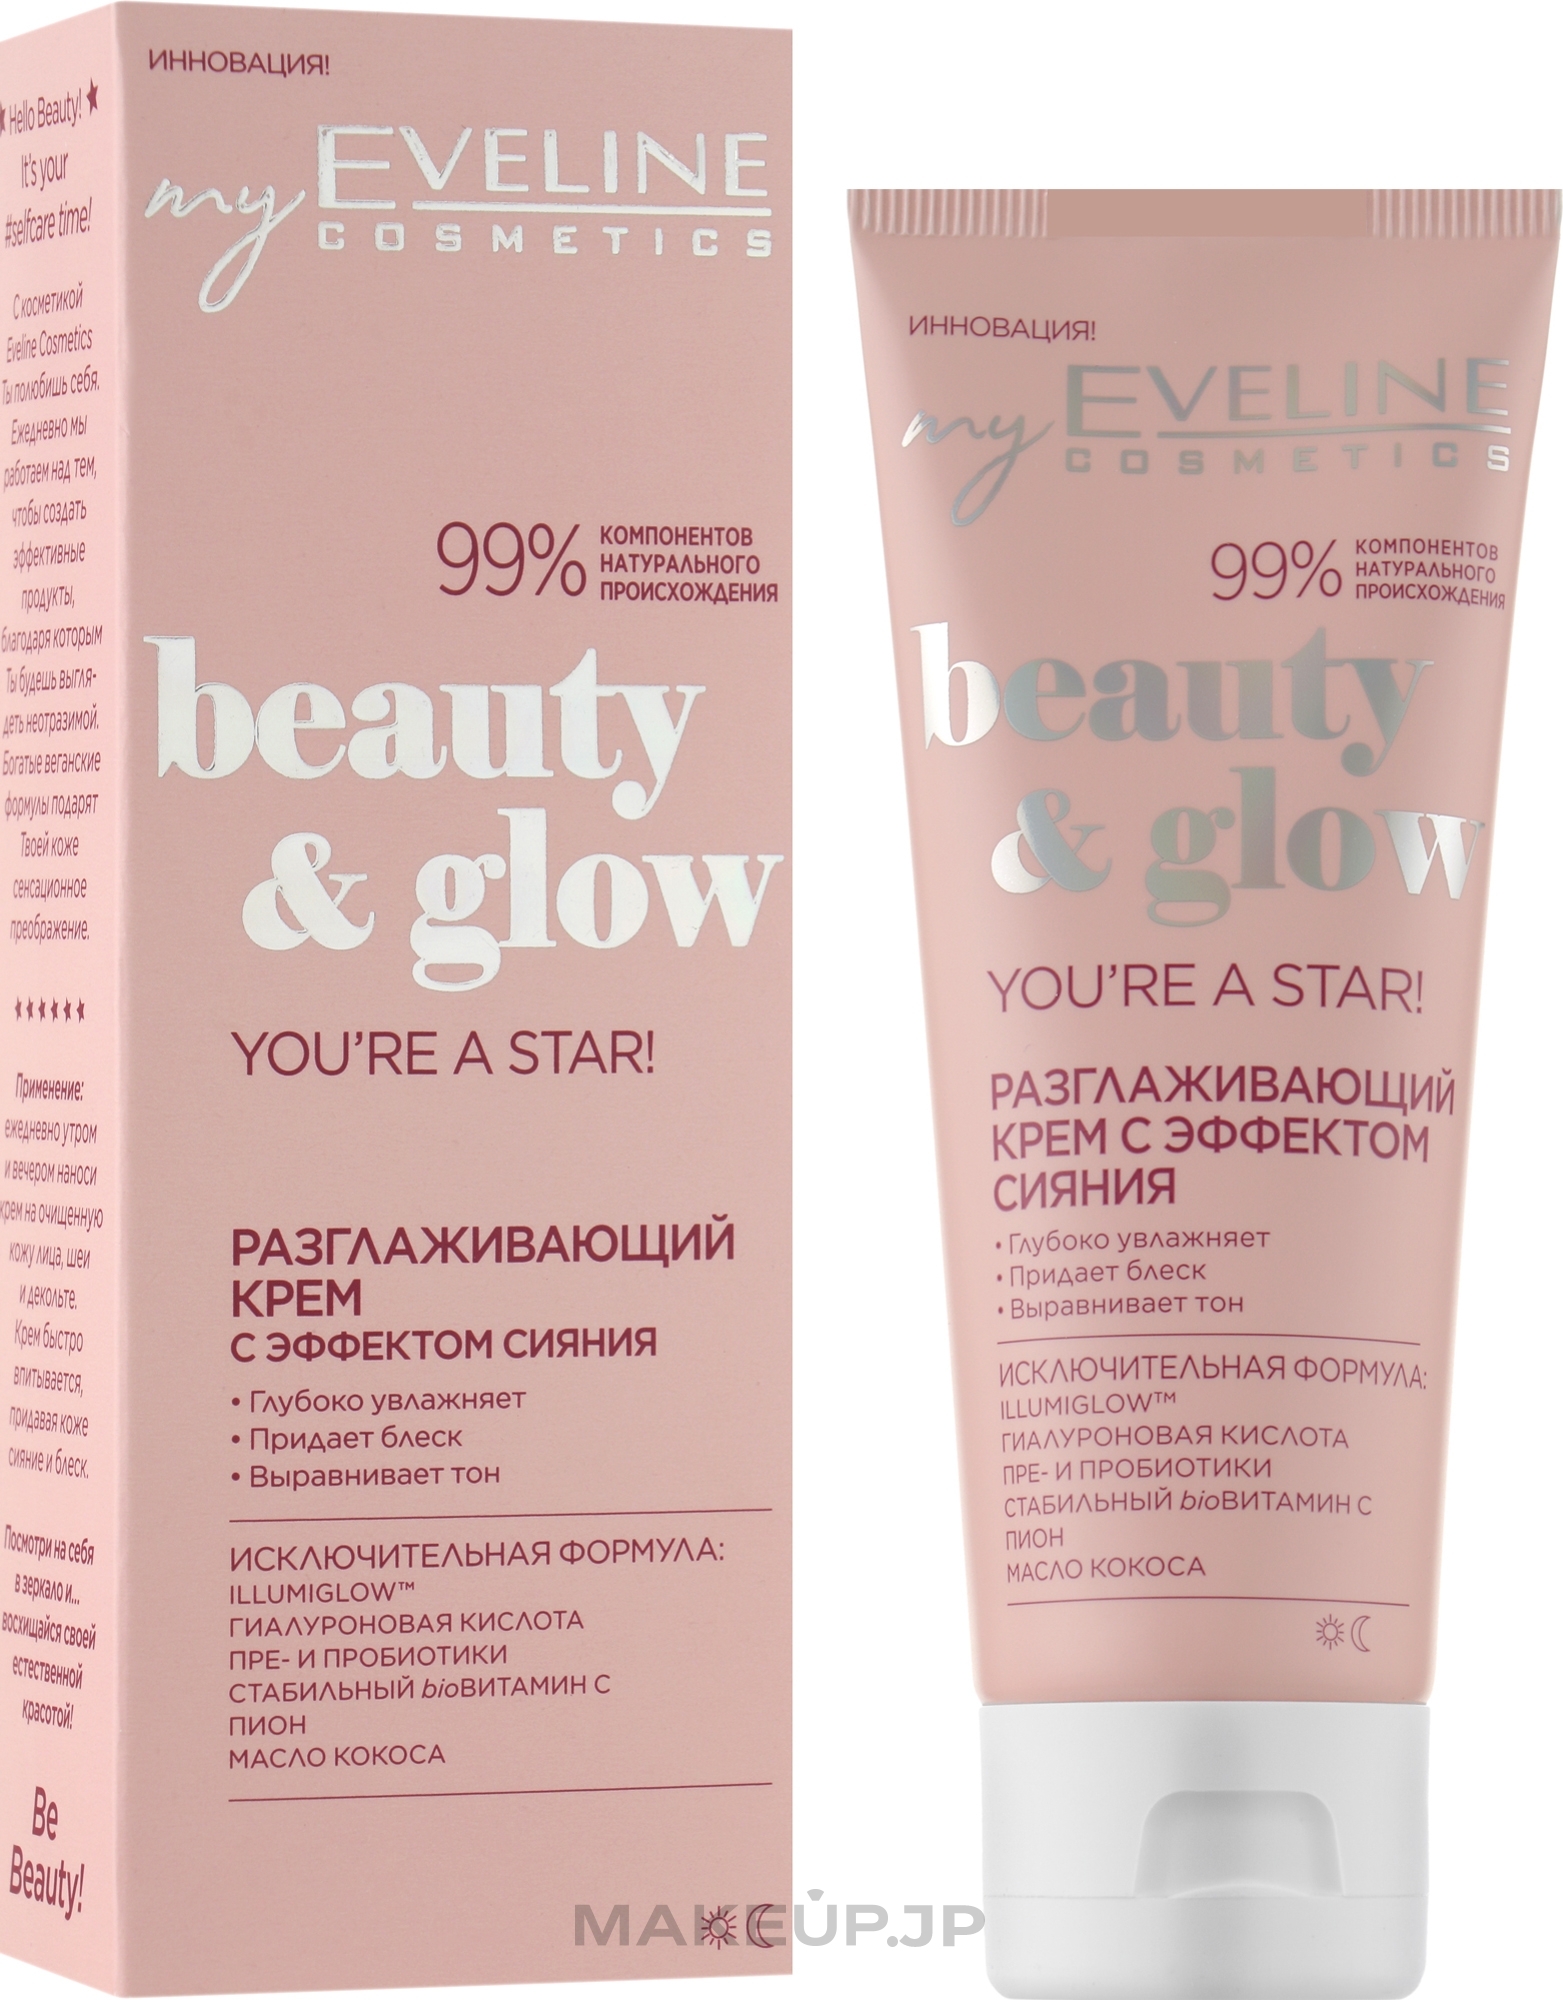 Brightening & Smoothing Face Cream - Eveline Cosmetics Beauty & Glow You're a Star! Brightening & Smoothing Face Cream — photo 75 ml